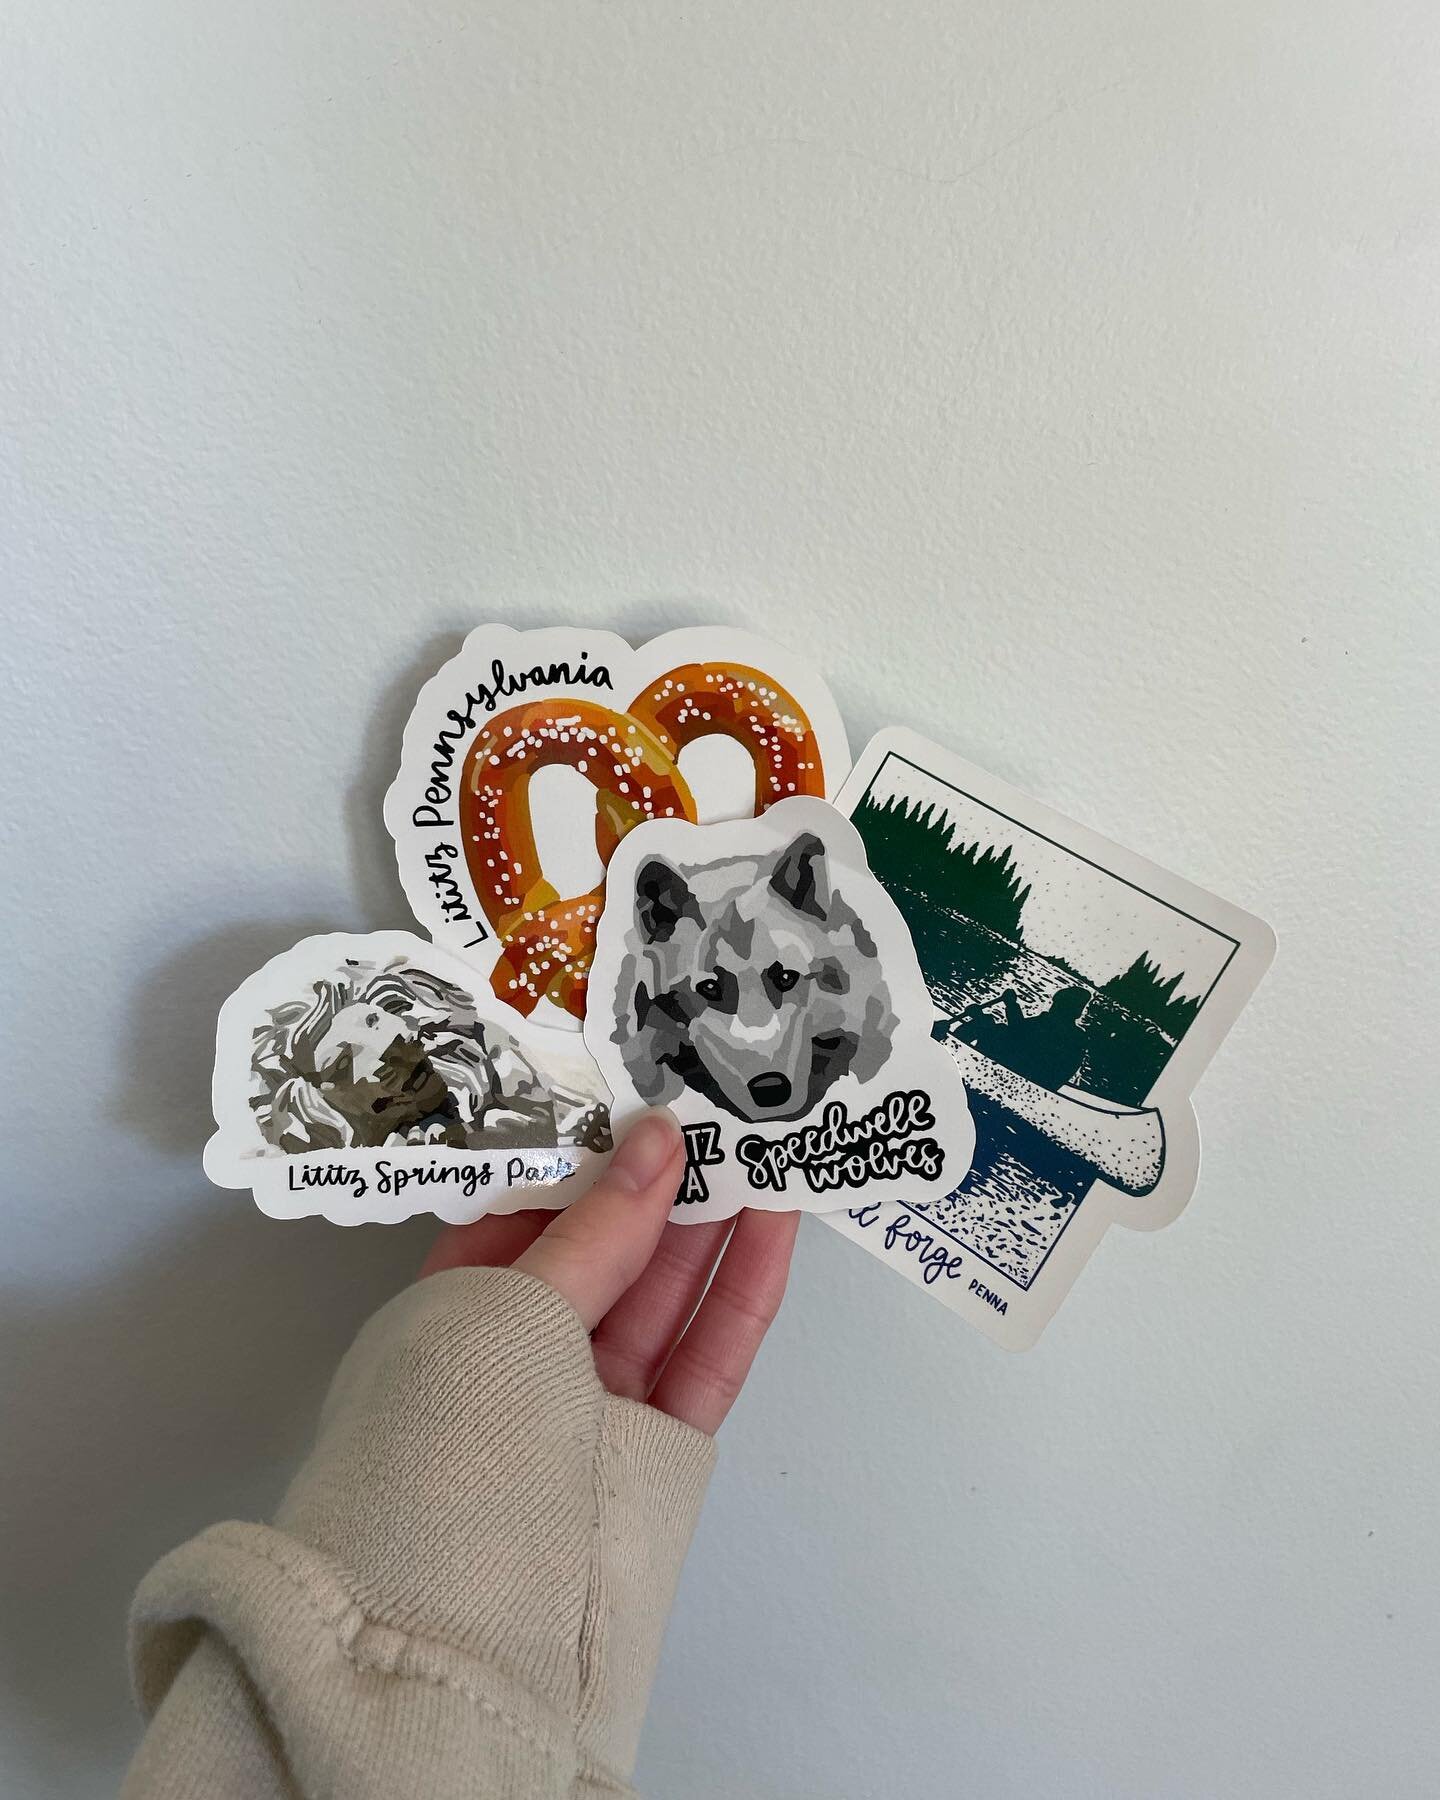 We're excited to announce 3 new products to our collection!! We now have a Speedwell wolf sticker and a Speedwell Forge sticker! You can also find a 4-pack with all of our local stickers on sale for a LIMITED TIME! You can find all of these @artisanm